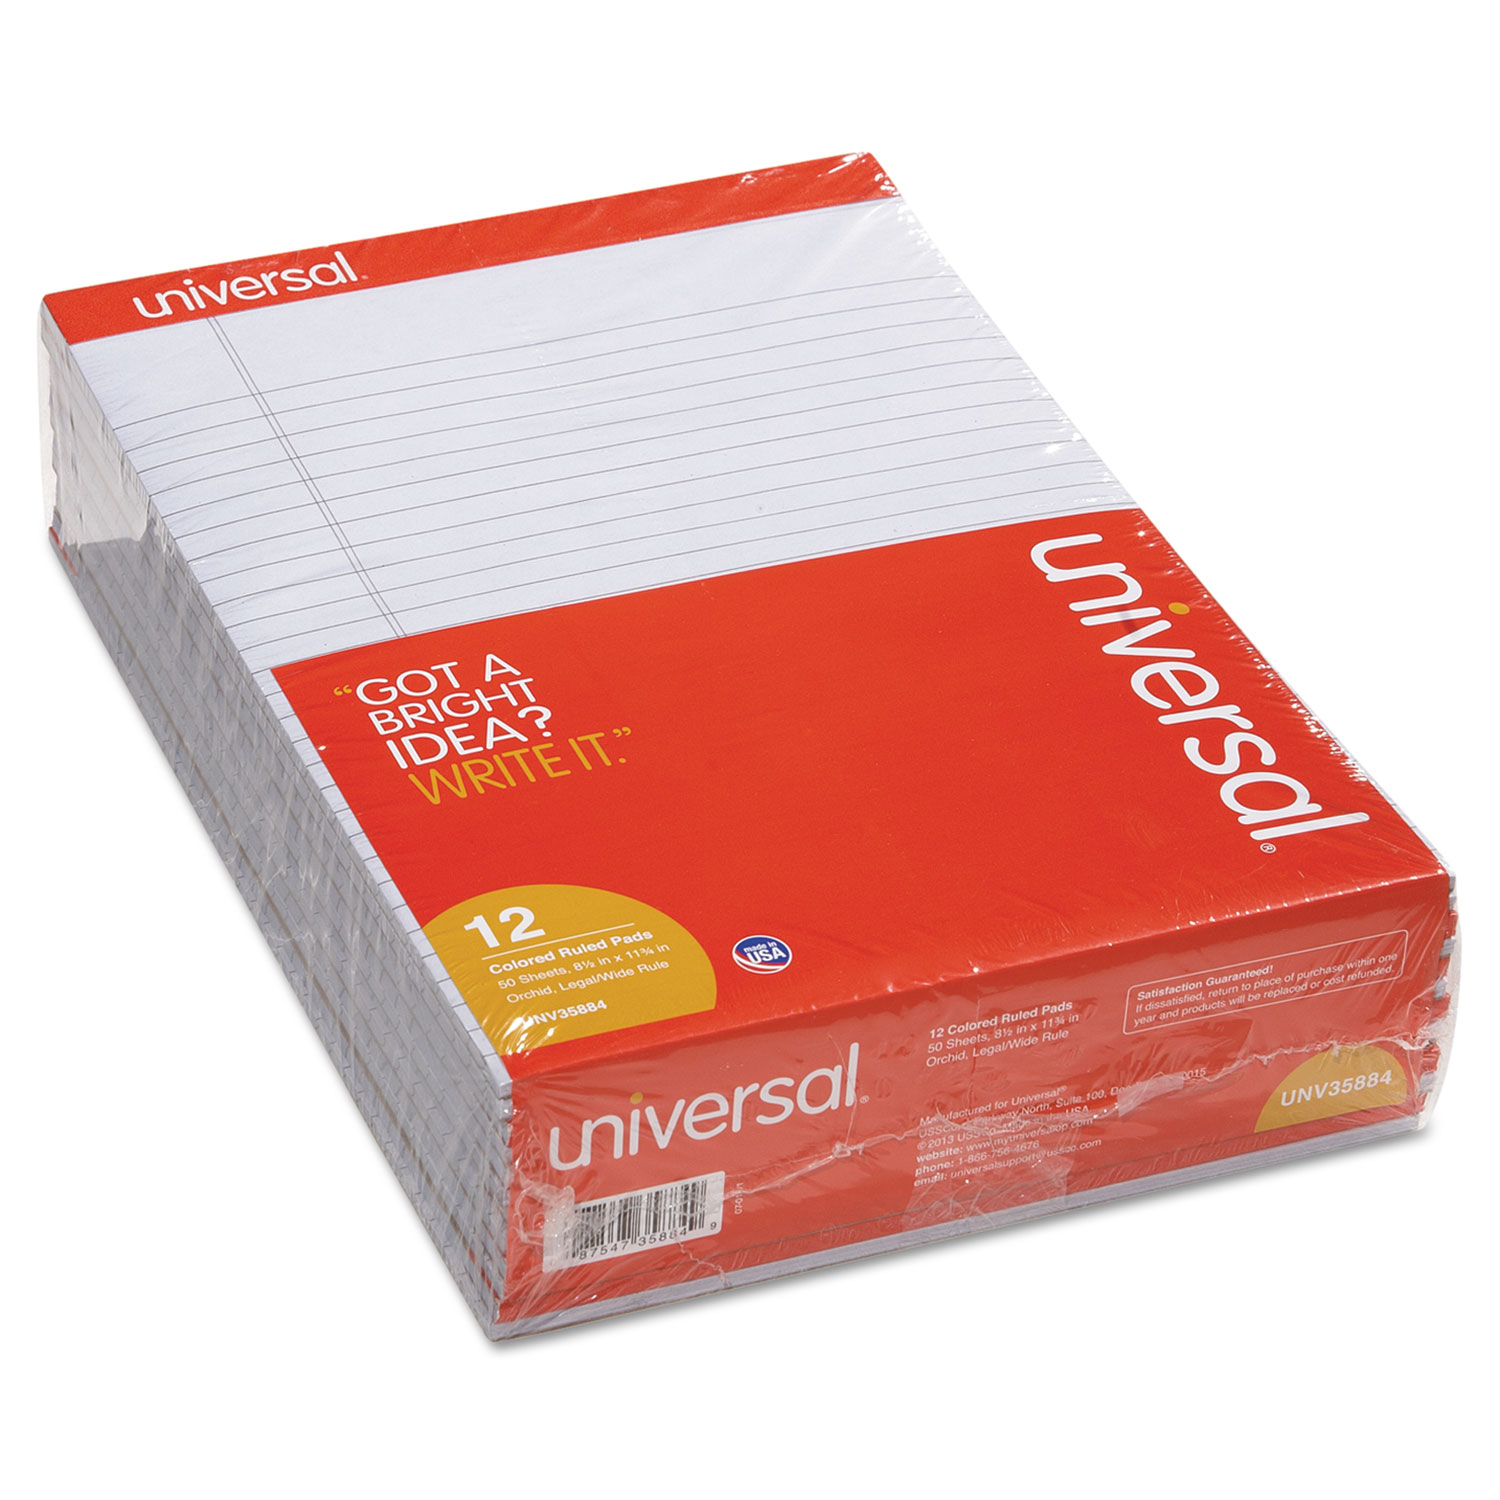  Universal UNV35884 Colored Perforated Writing Pads, Wide/Legal Rule, 8.5 x 11, Orchid, 50 Sheets, Dozen (UNV35884) 